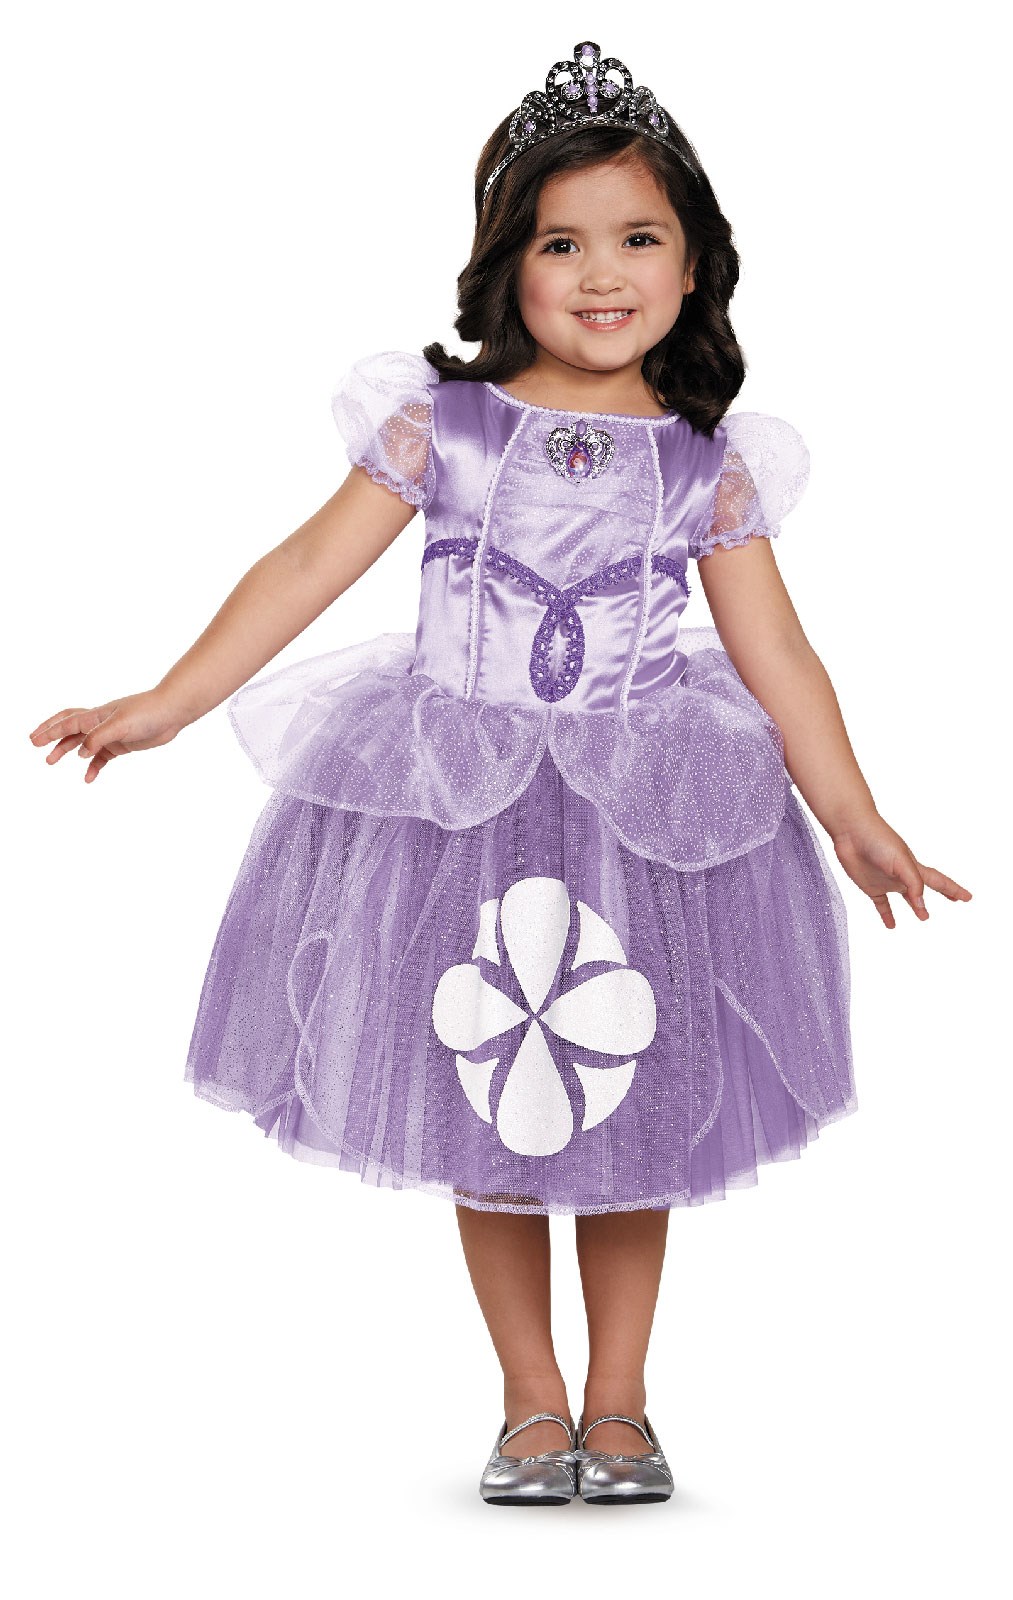 Sofia the First Deluxe Tutu Costume For Toddlers